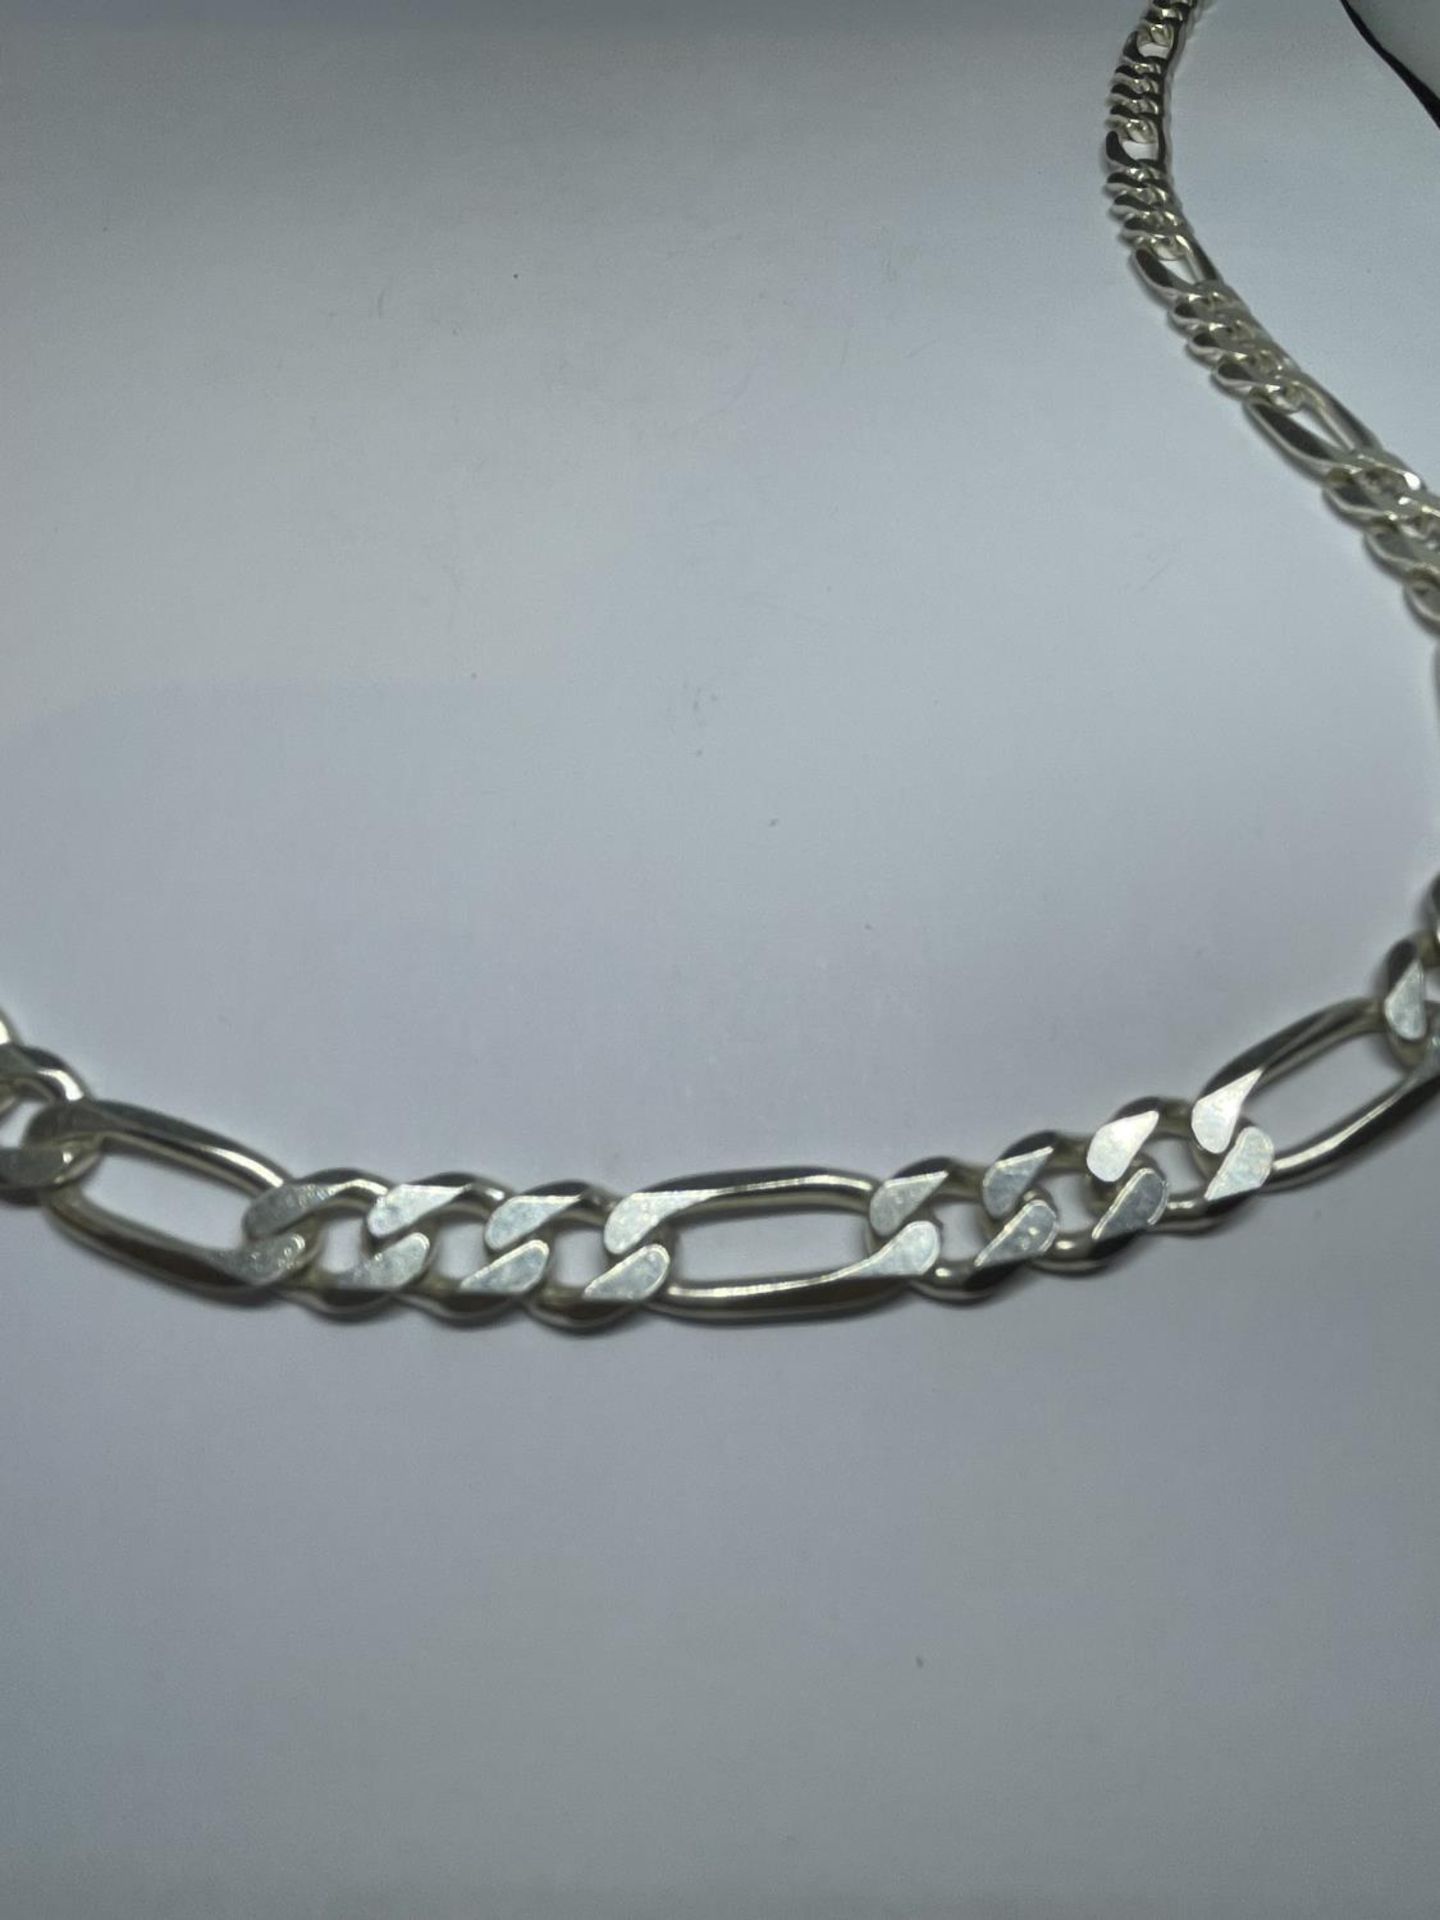 A MARKED SILVER FLAT LINK NECK CHAIN - Image 2 of 3